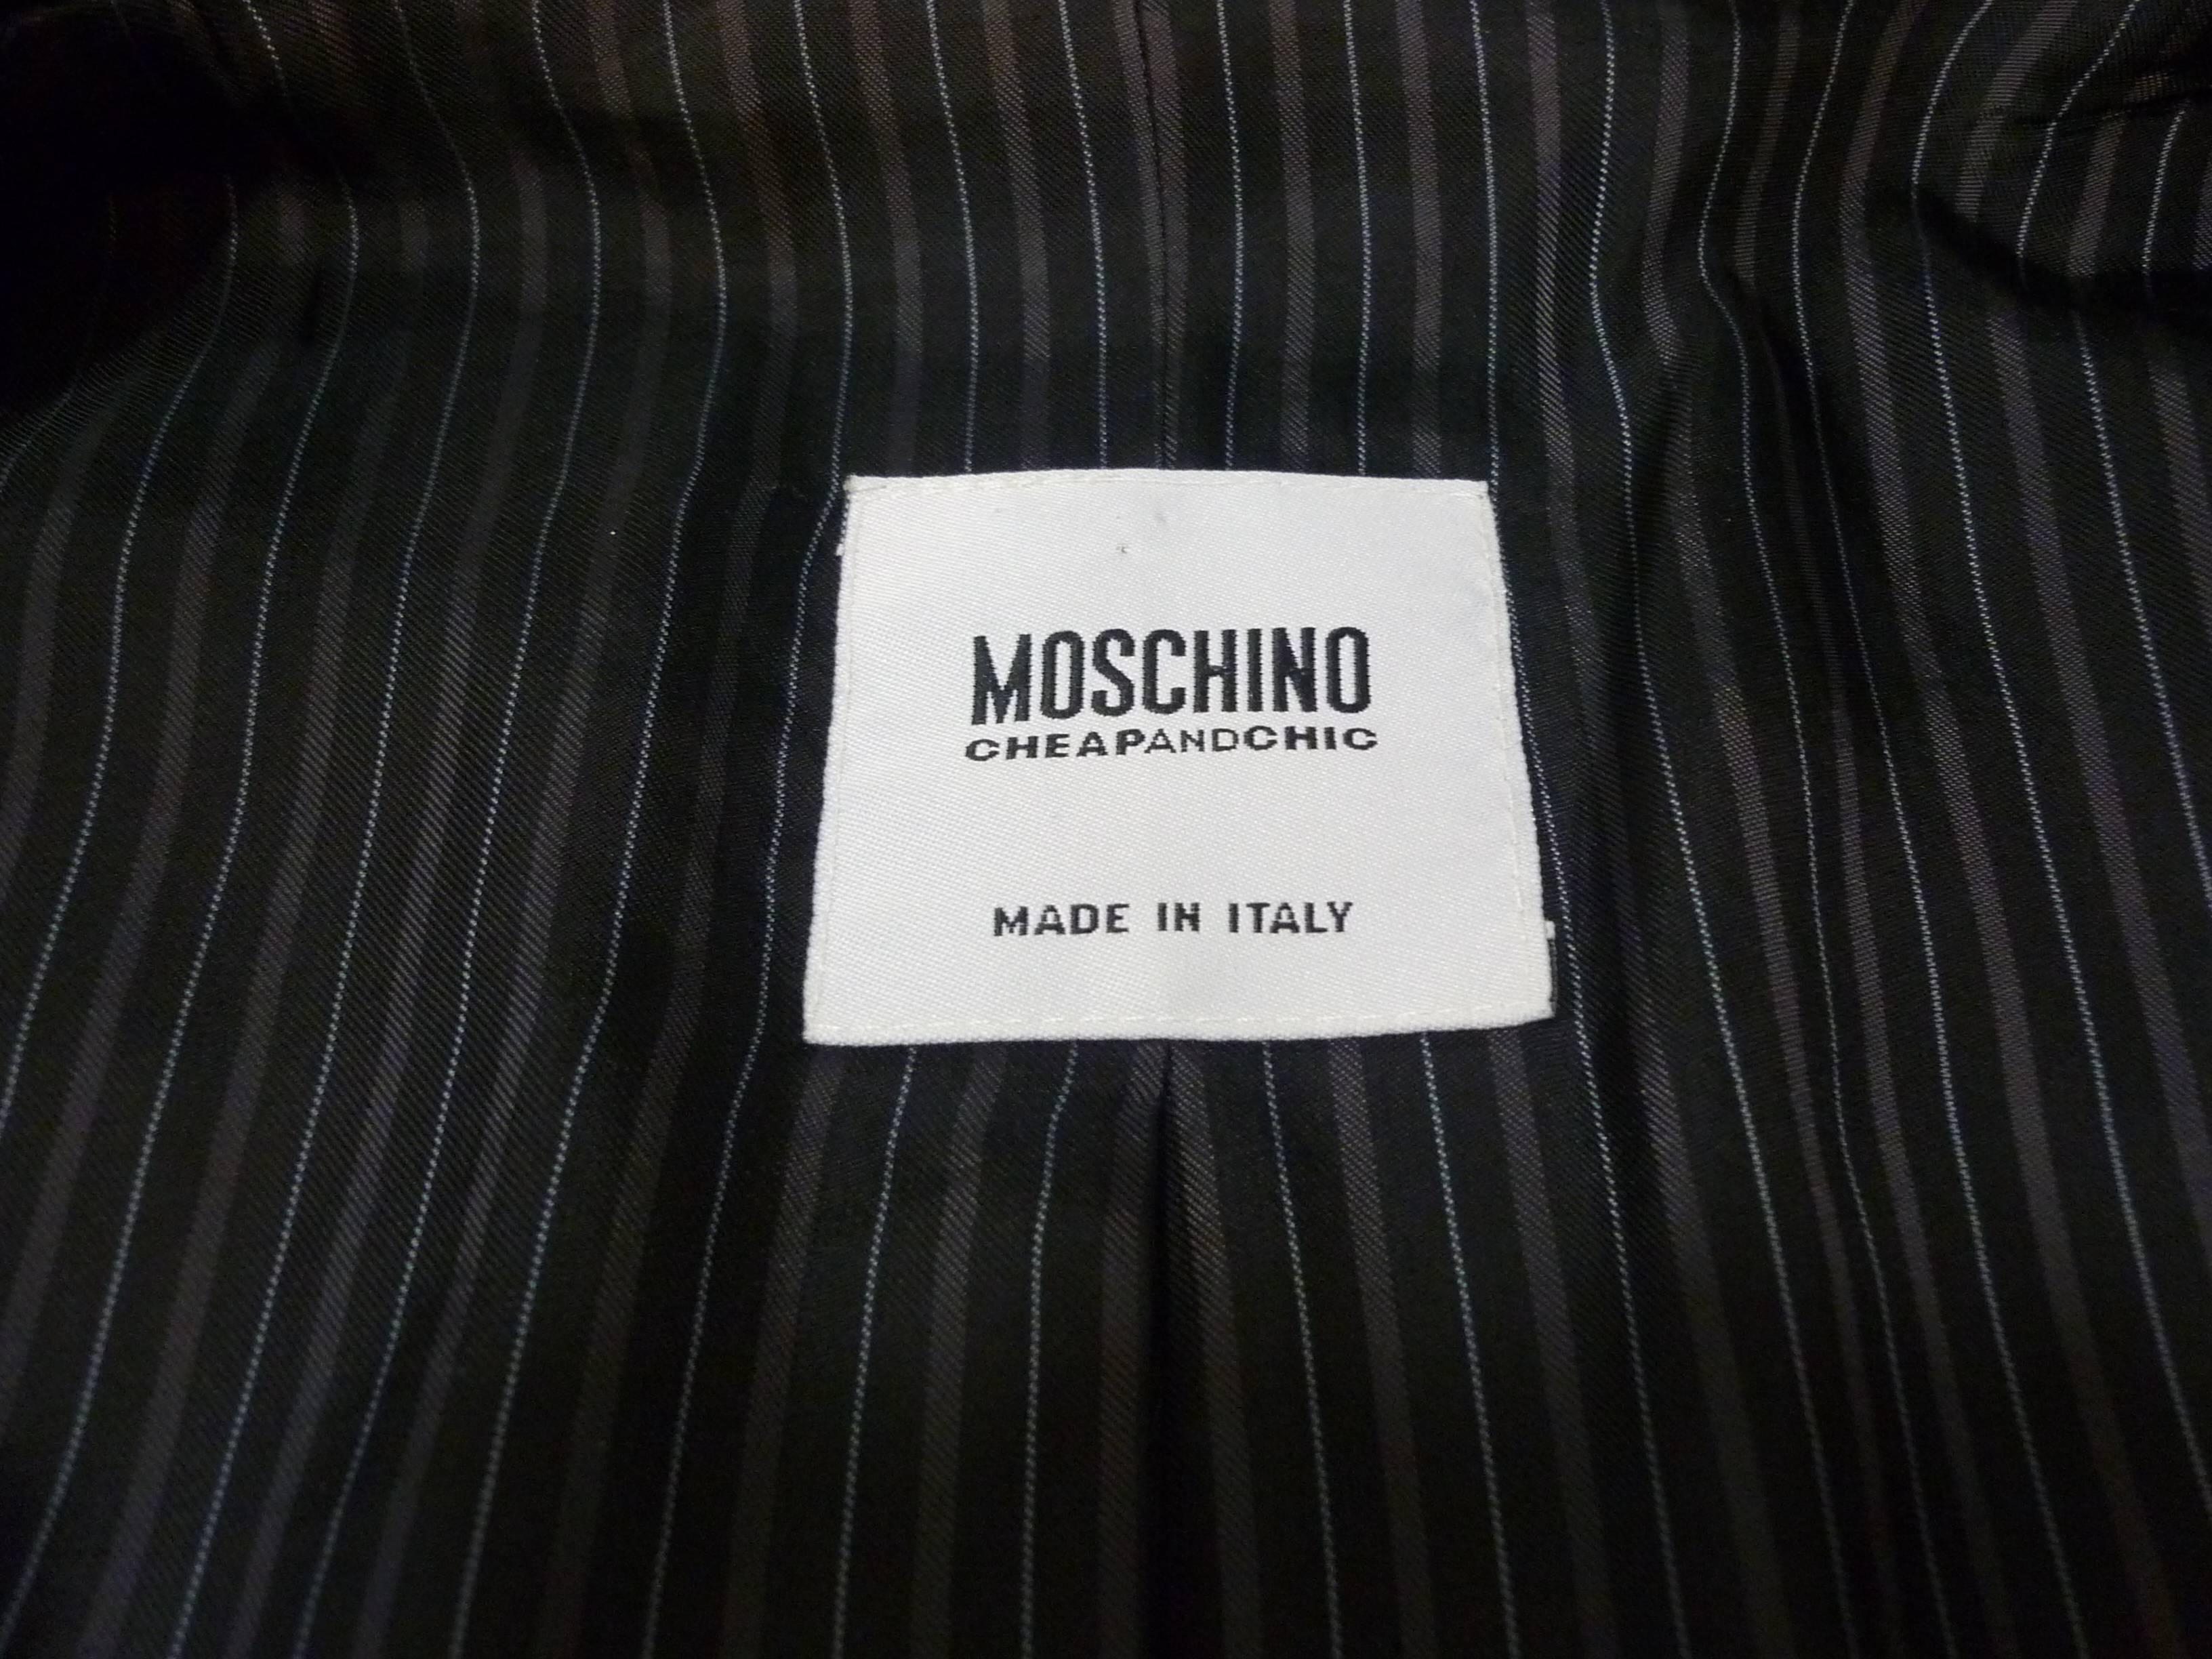 Moschino Cheap and Chic Black Jacket with Leaf and Flower Applique 44 (Itl) For Sale 4